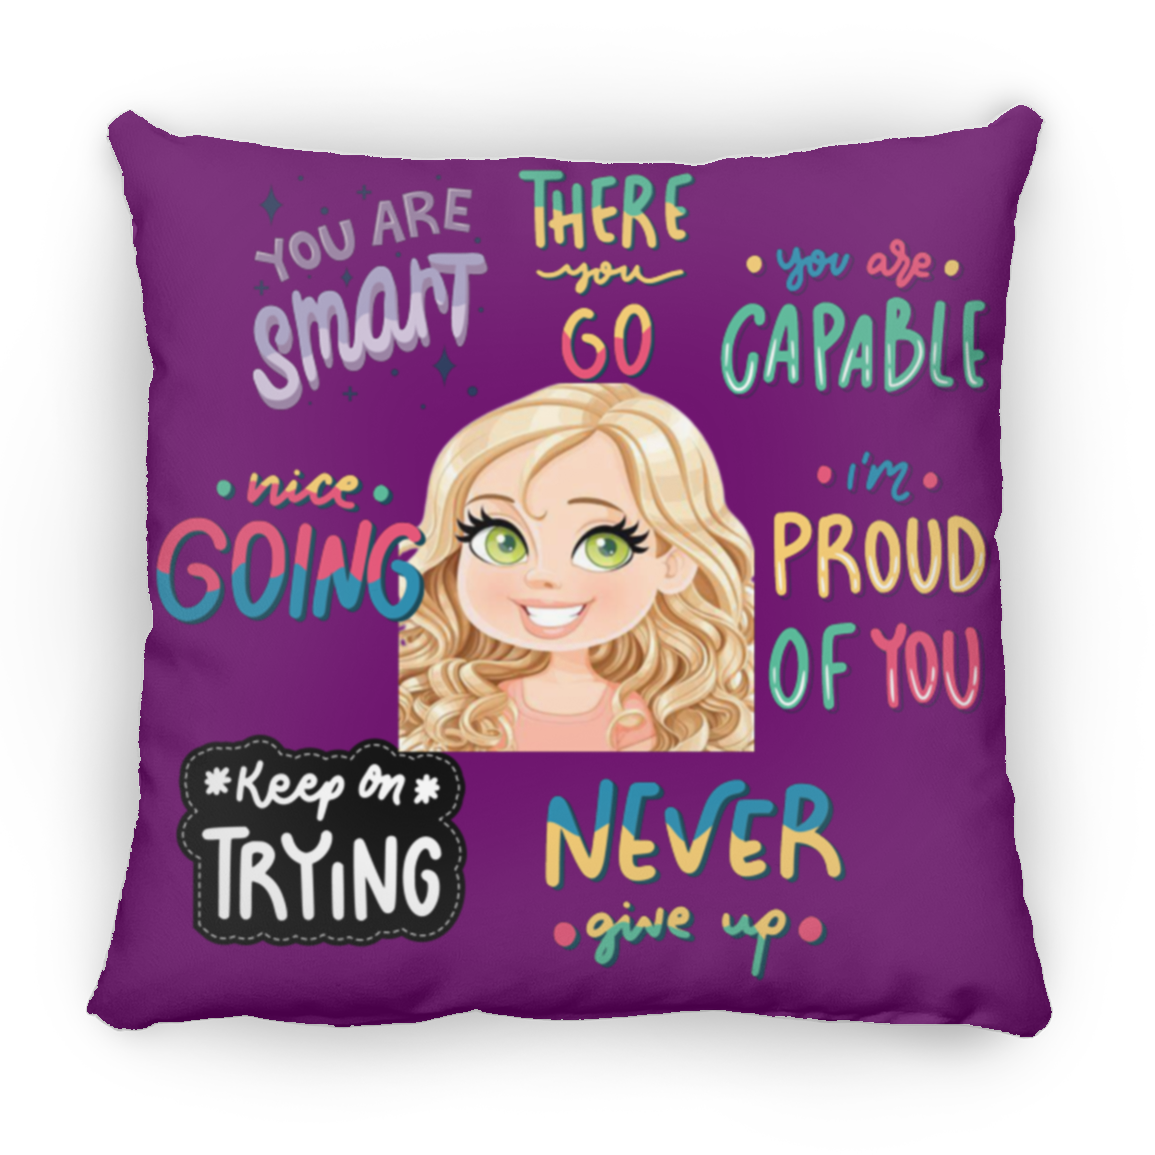 You Are Smart. Large Square Pillow